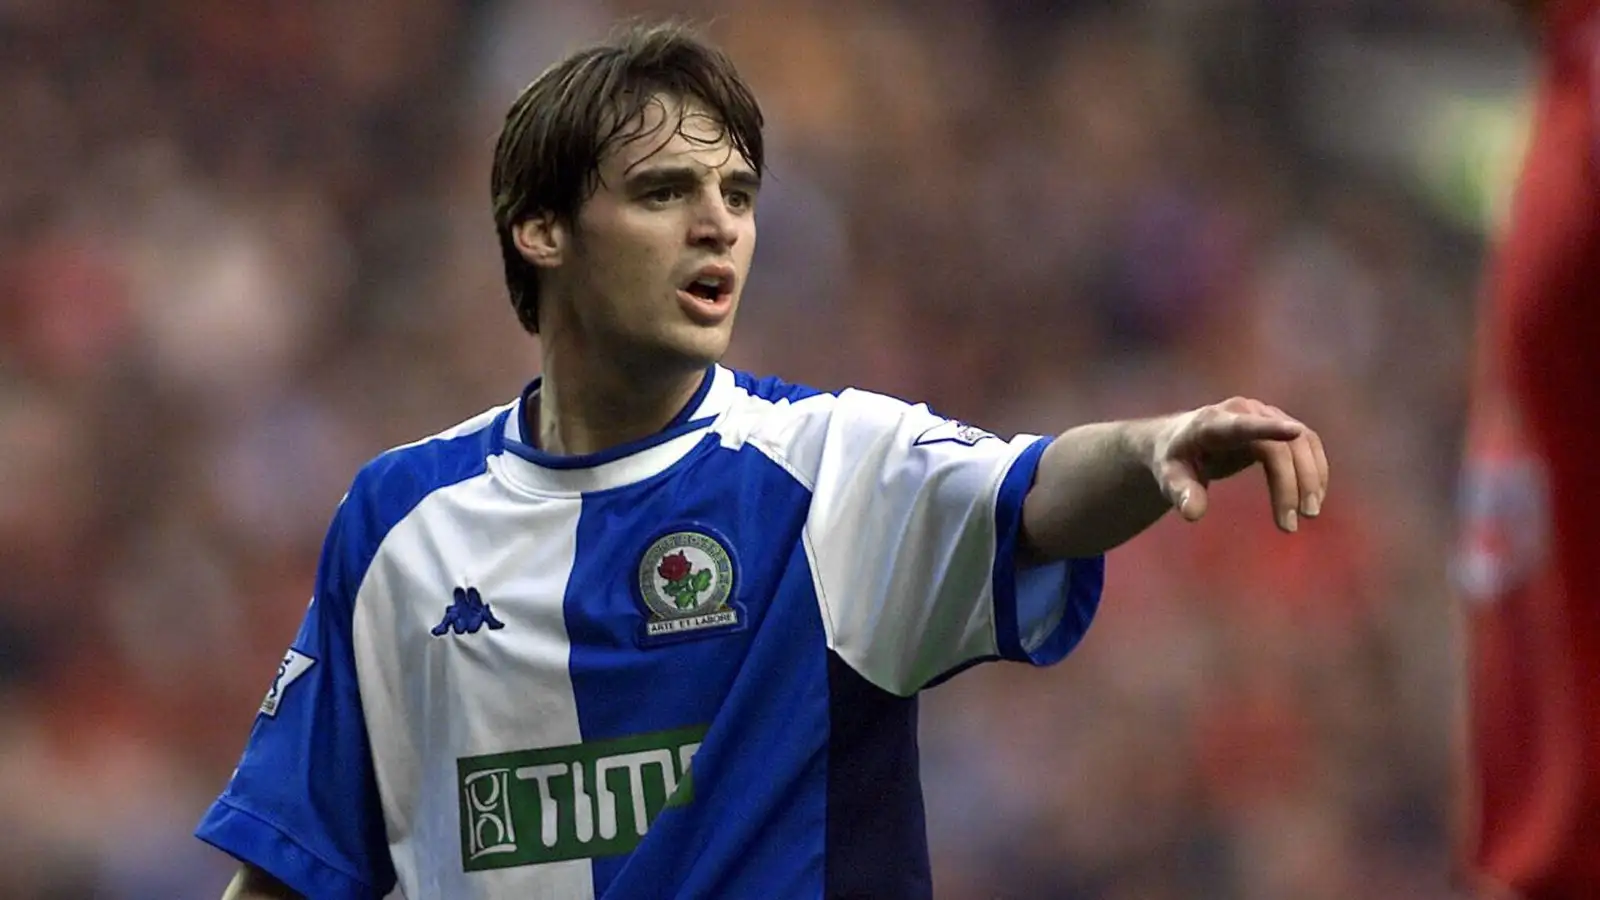 Matt Jansen: The man who turned down Fergie & the agony of ‘what if?’